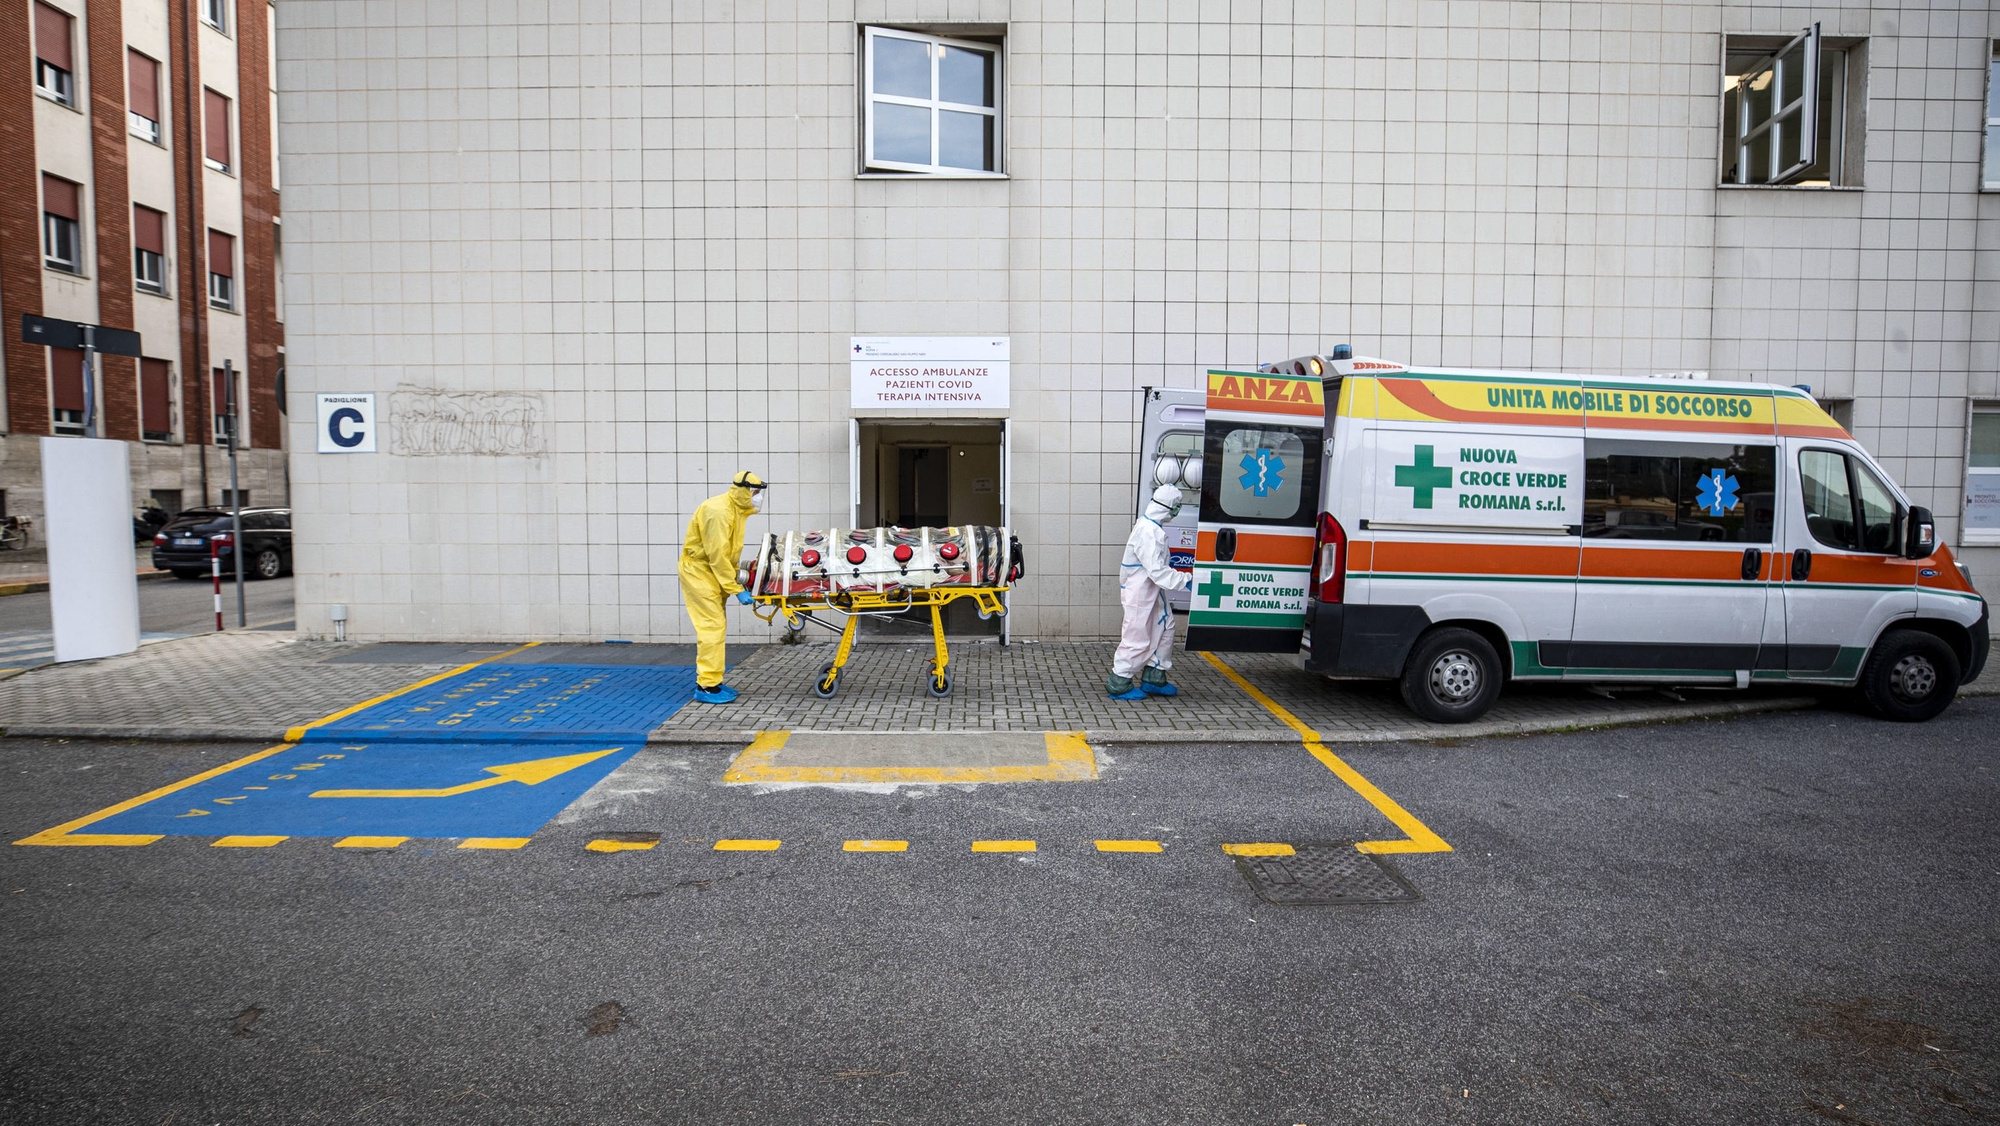 epa08786179 The arrival of a patient in the Intensive Care Unit (ICU) for the novel coronavirus, COVID-19 cases, in the San Filippo Neri hospital in Rome, Italy, 30 October 2020. Italy&#039;s Prime Minister Giuseppe Conte tightened nationwide coronavirus restrictions after the country registered a record number of new cases.  EPA/MASSIMO PERCOSSI